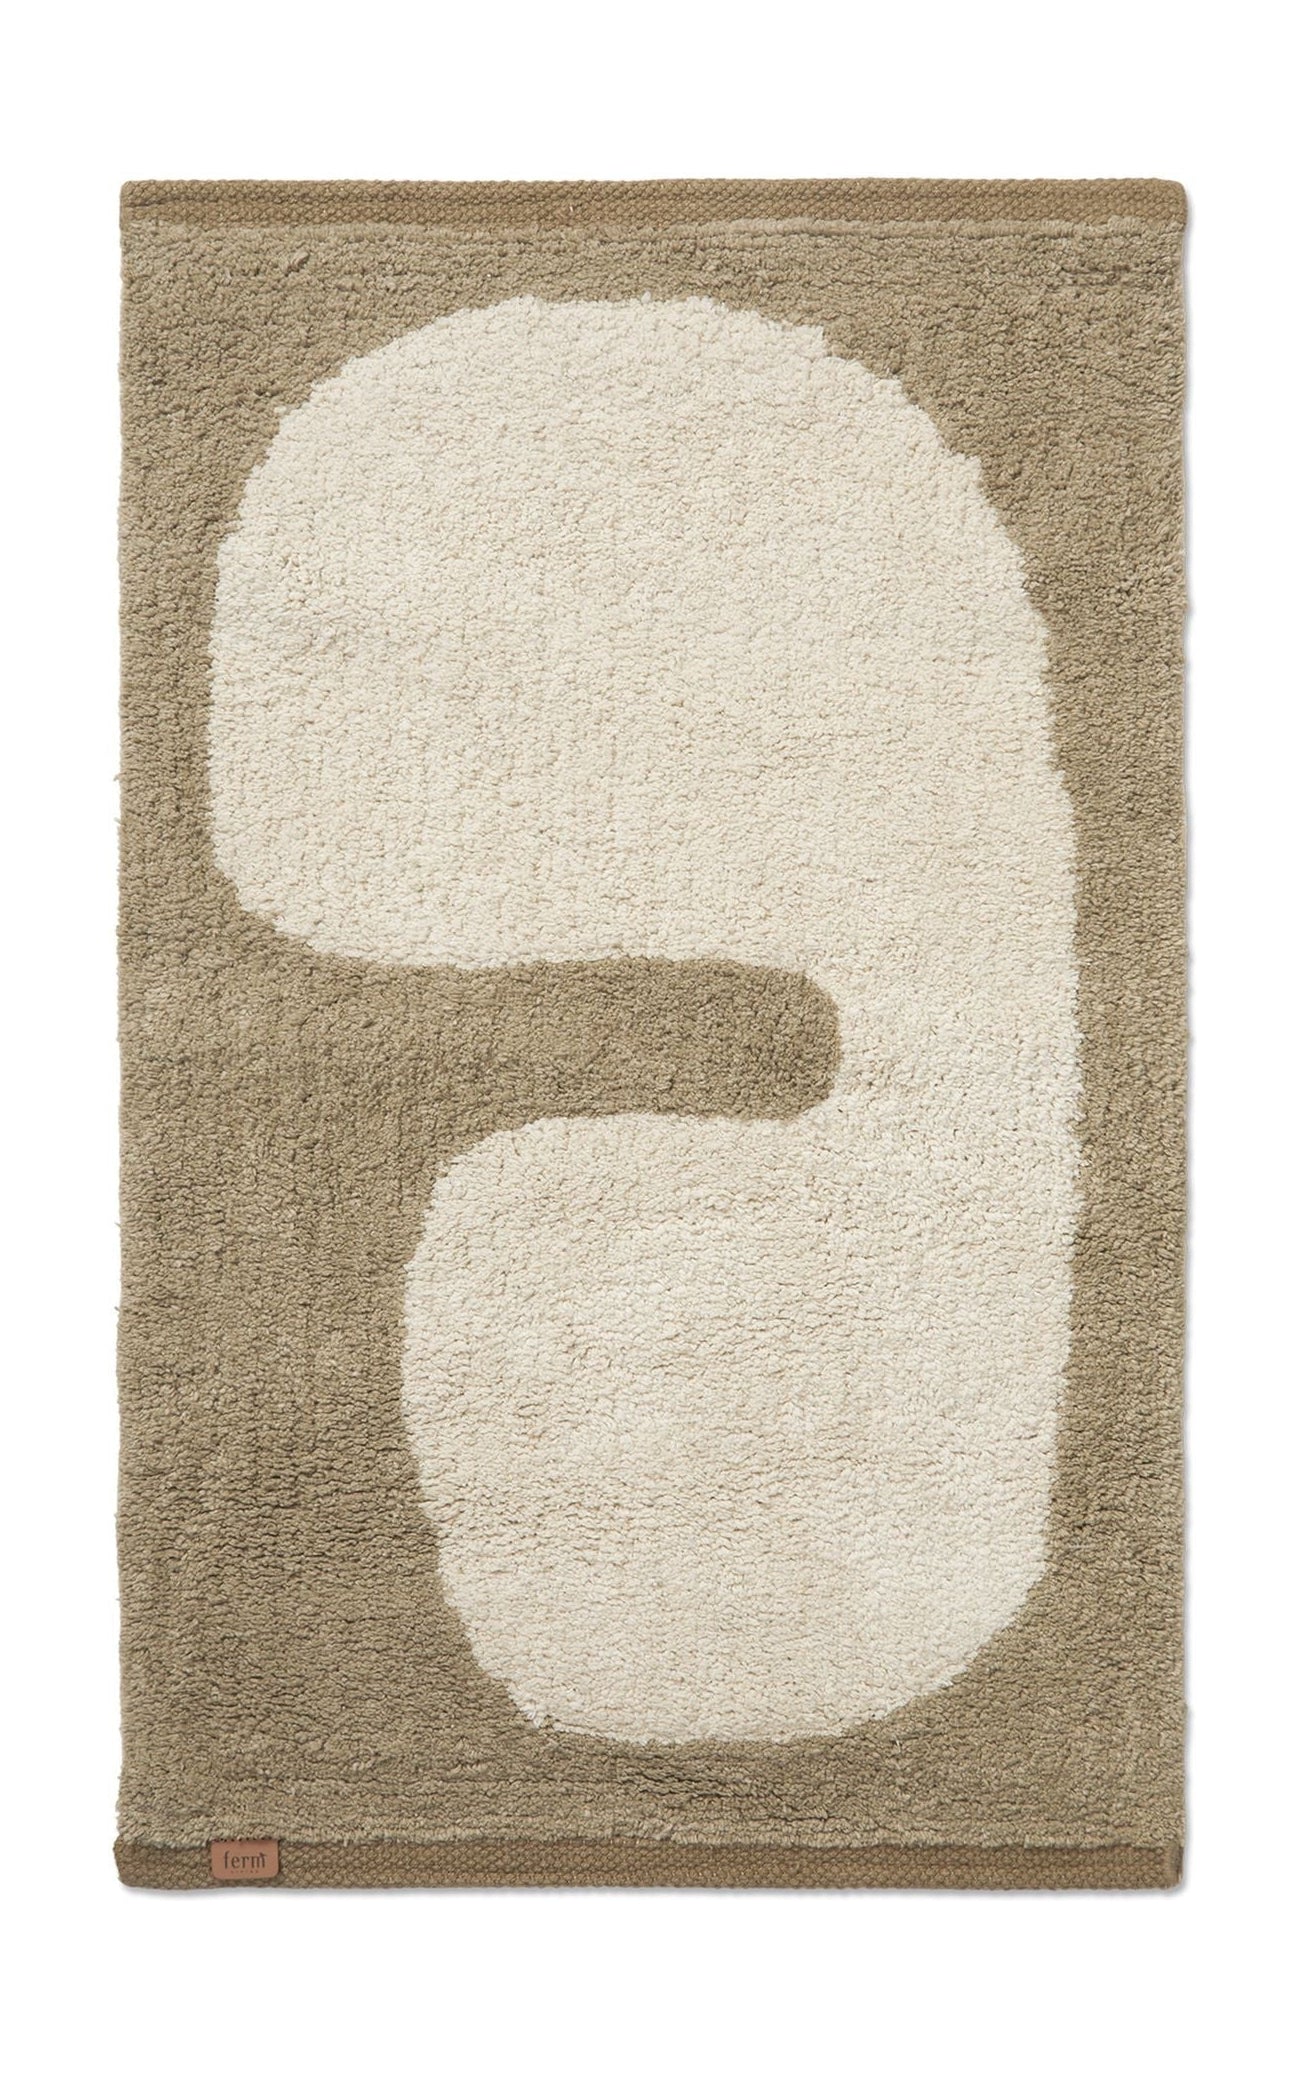 Ferm Living Lay Washable Mat, Dark Taupe/Off White